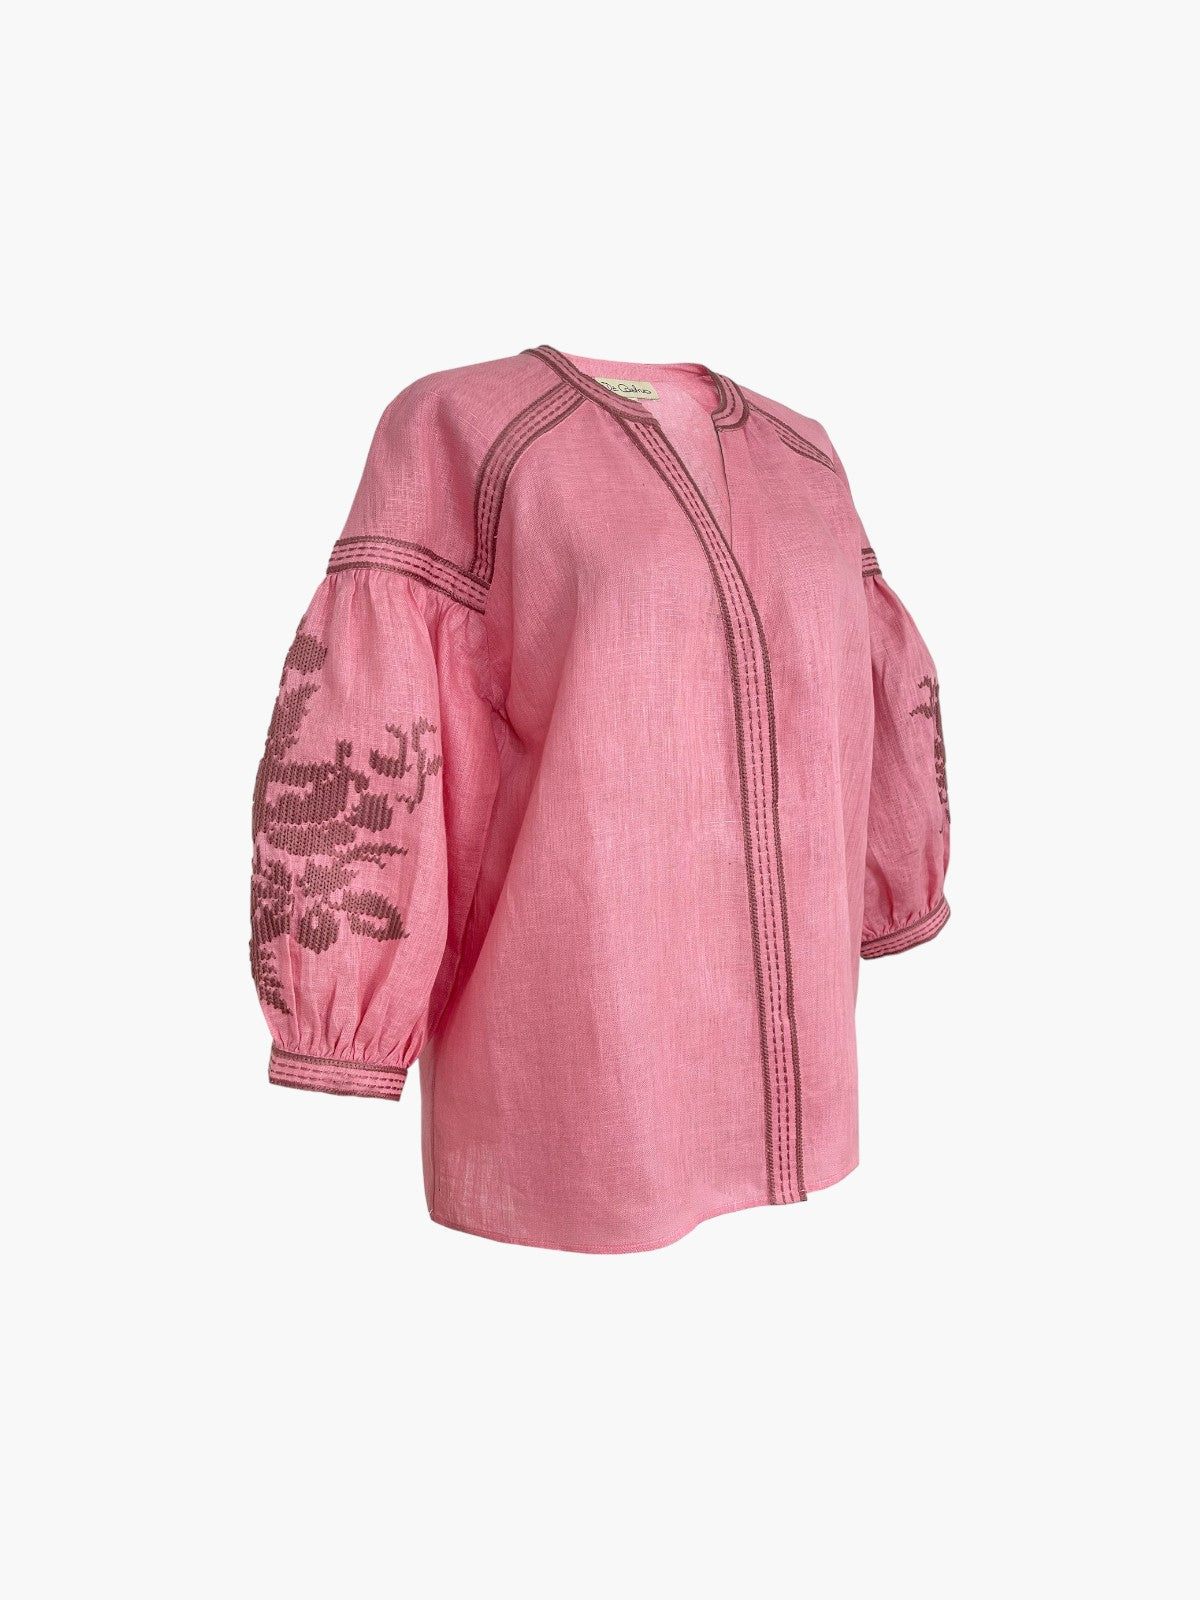 Baby Pink Blouse Baby Pink Blouse